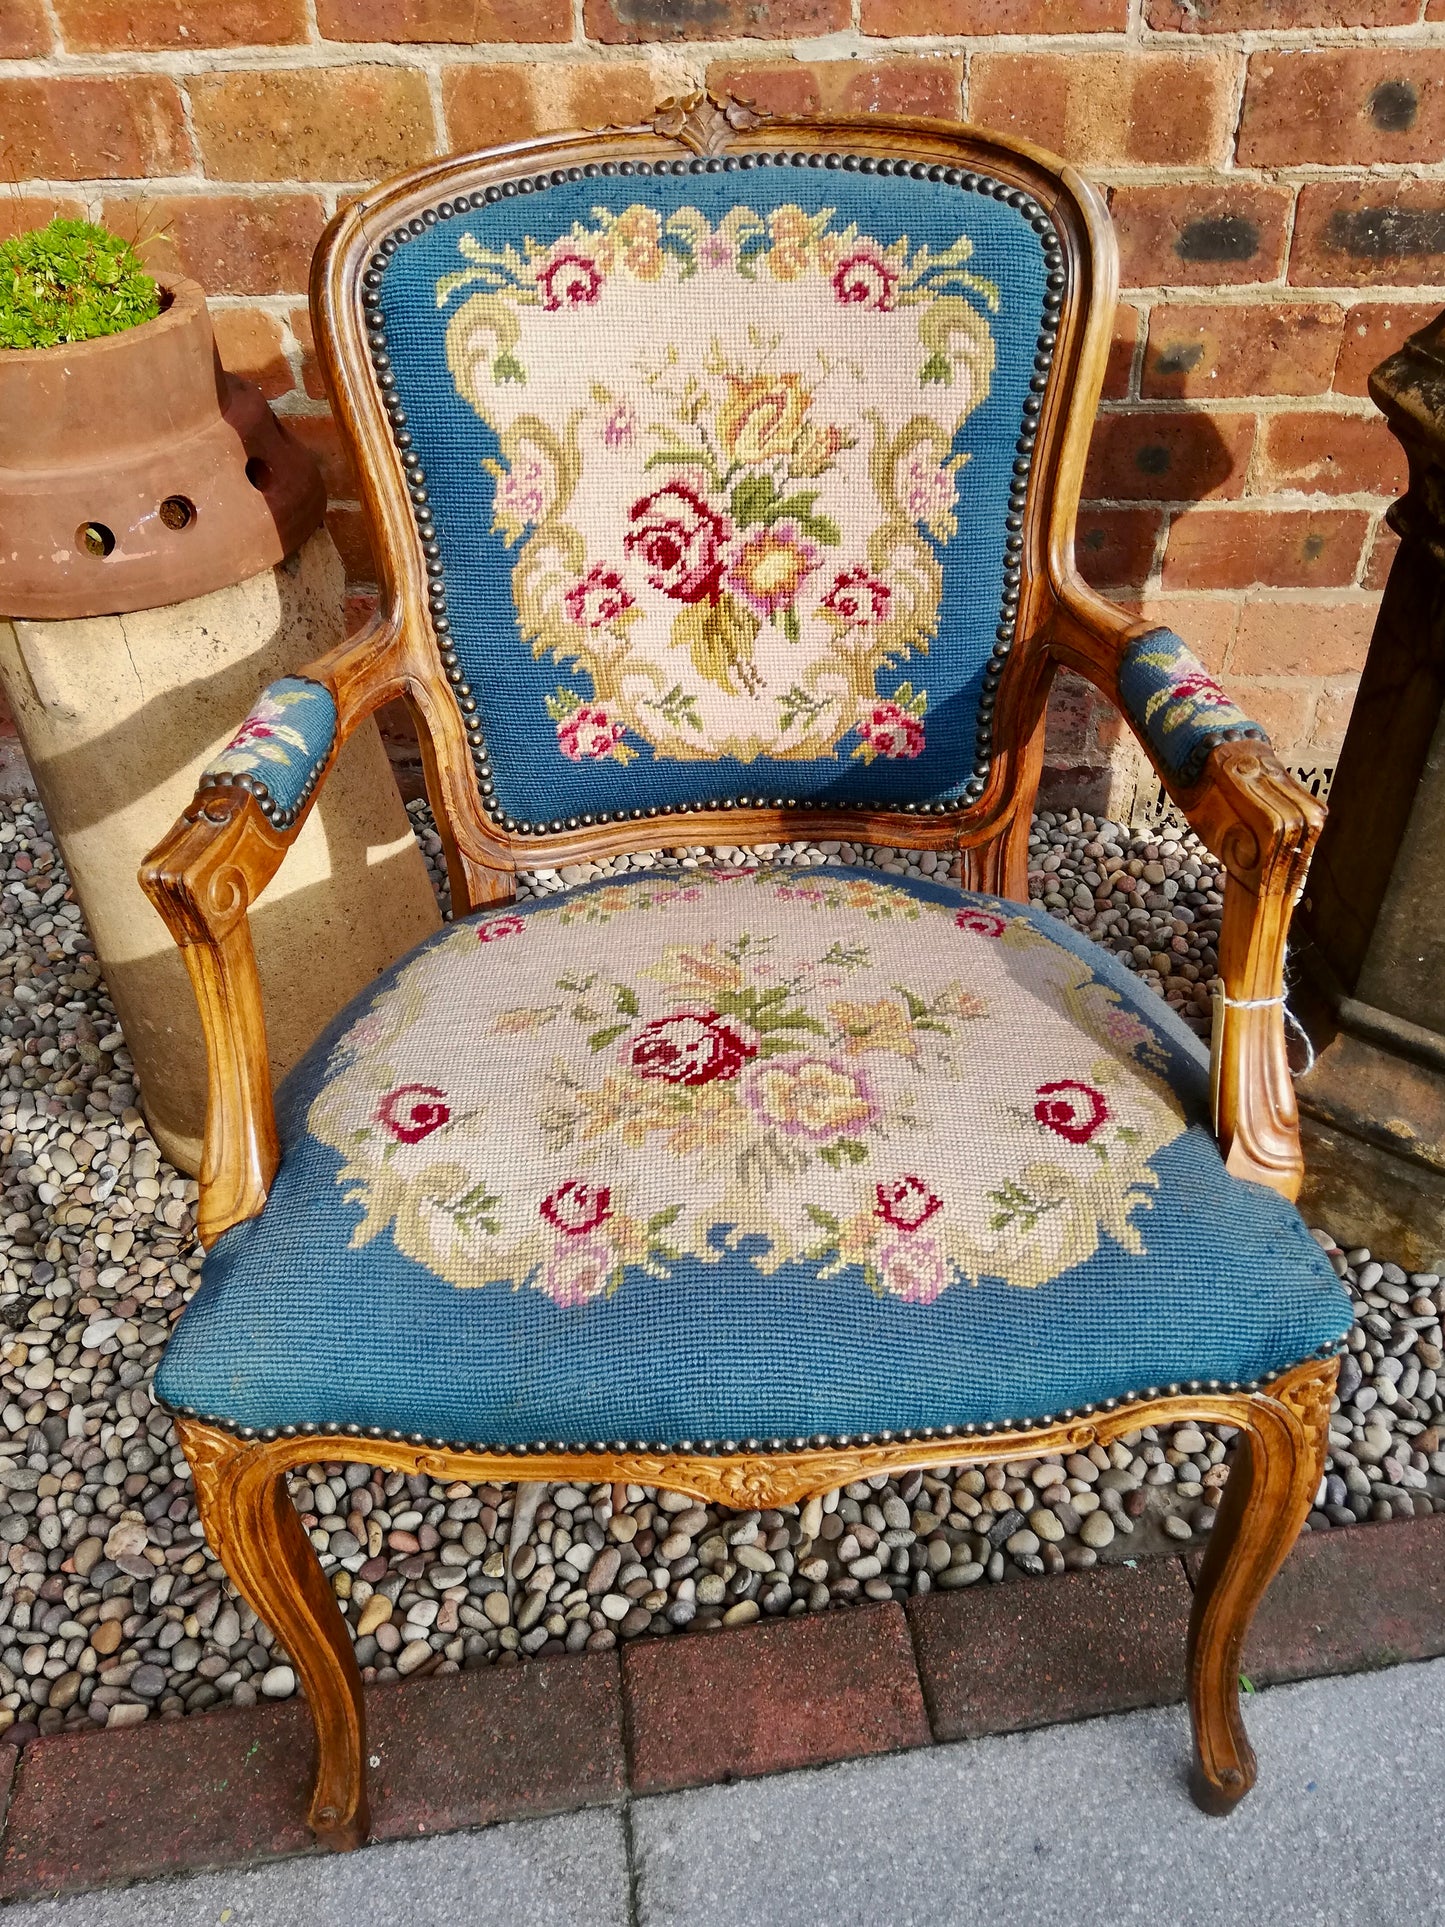 Vintage bedroom chair available for reupholstery and painting your choice of colour